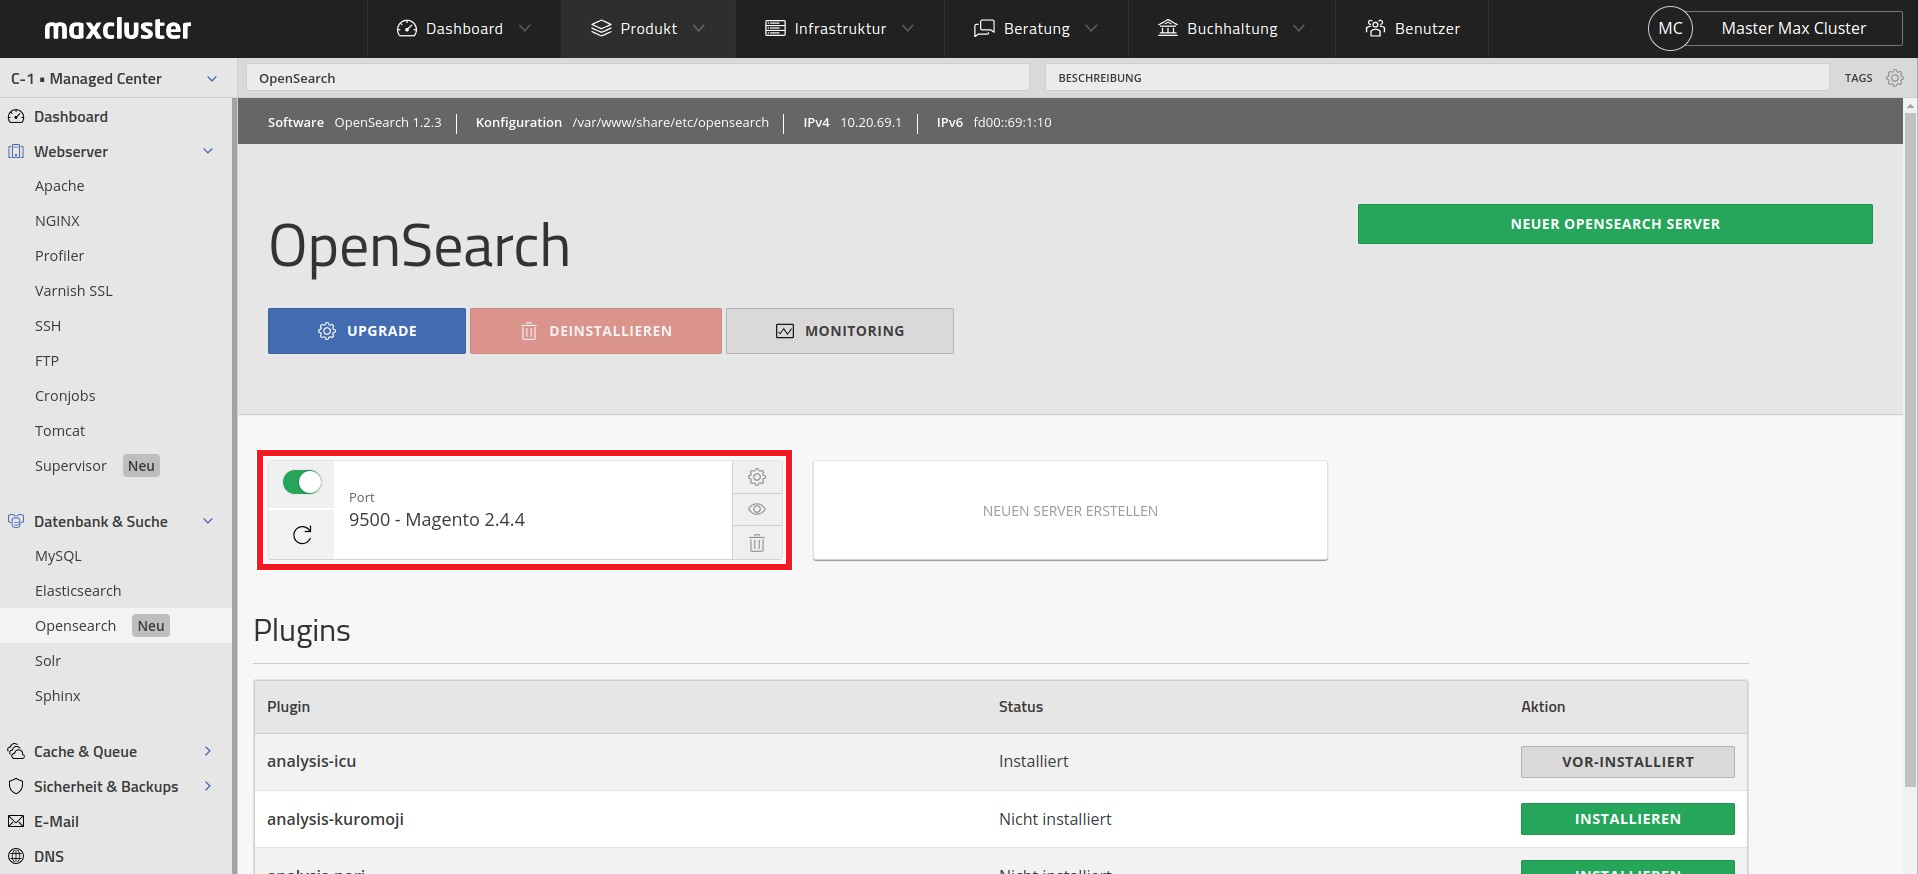 Step 3: OpenSearch instance is now active